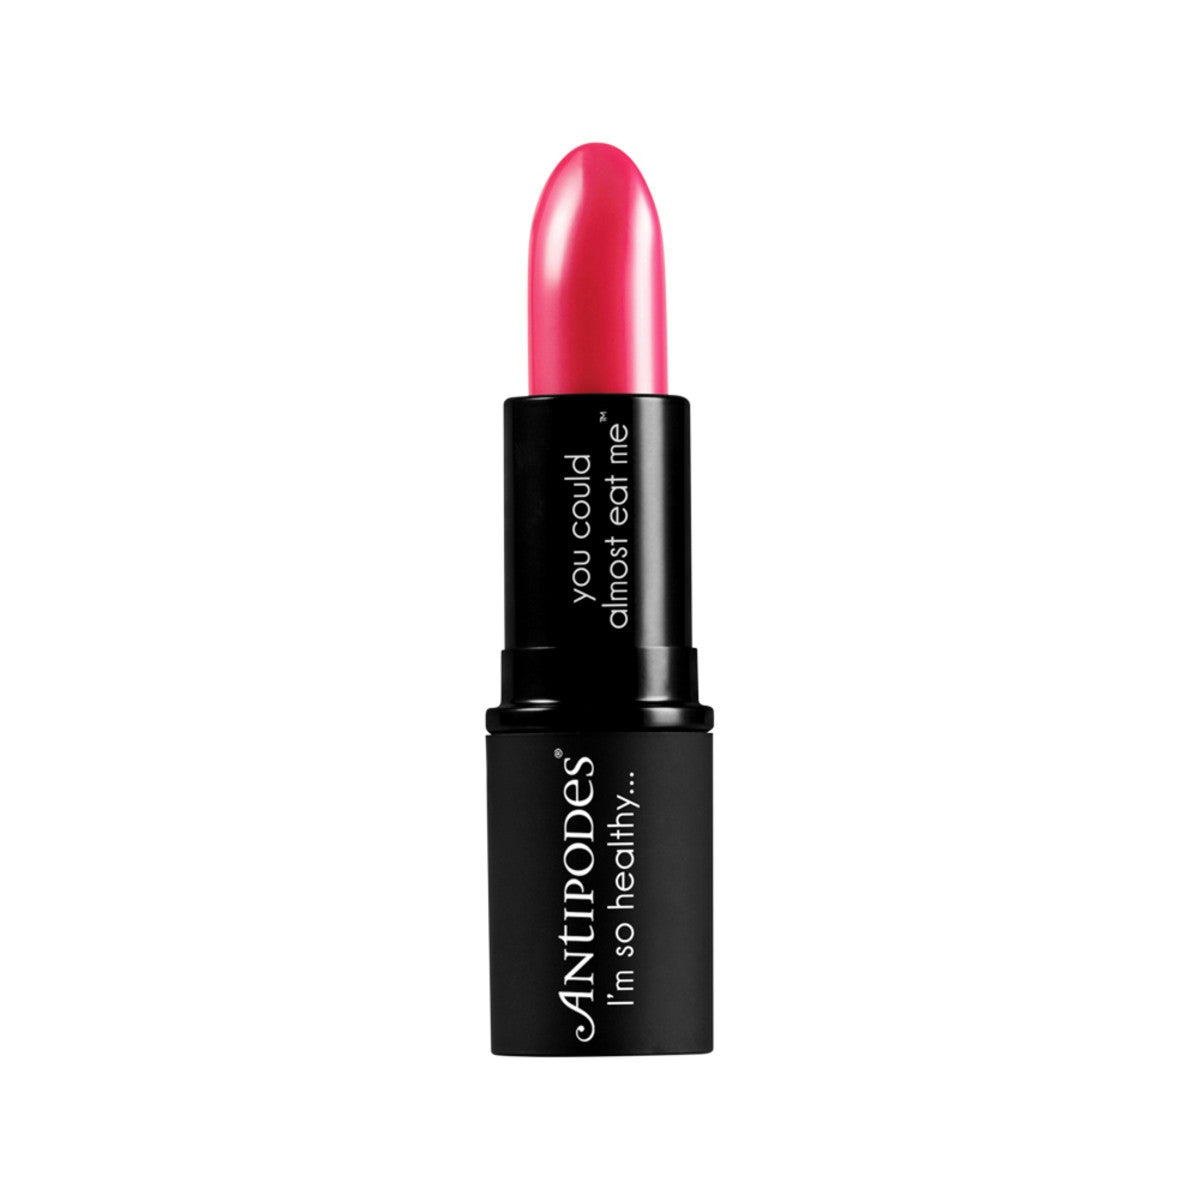 image of Antipodes Moisture-Boost Natural Lipstick Dragon Fruit Pink 4g on white background 